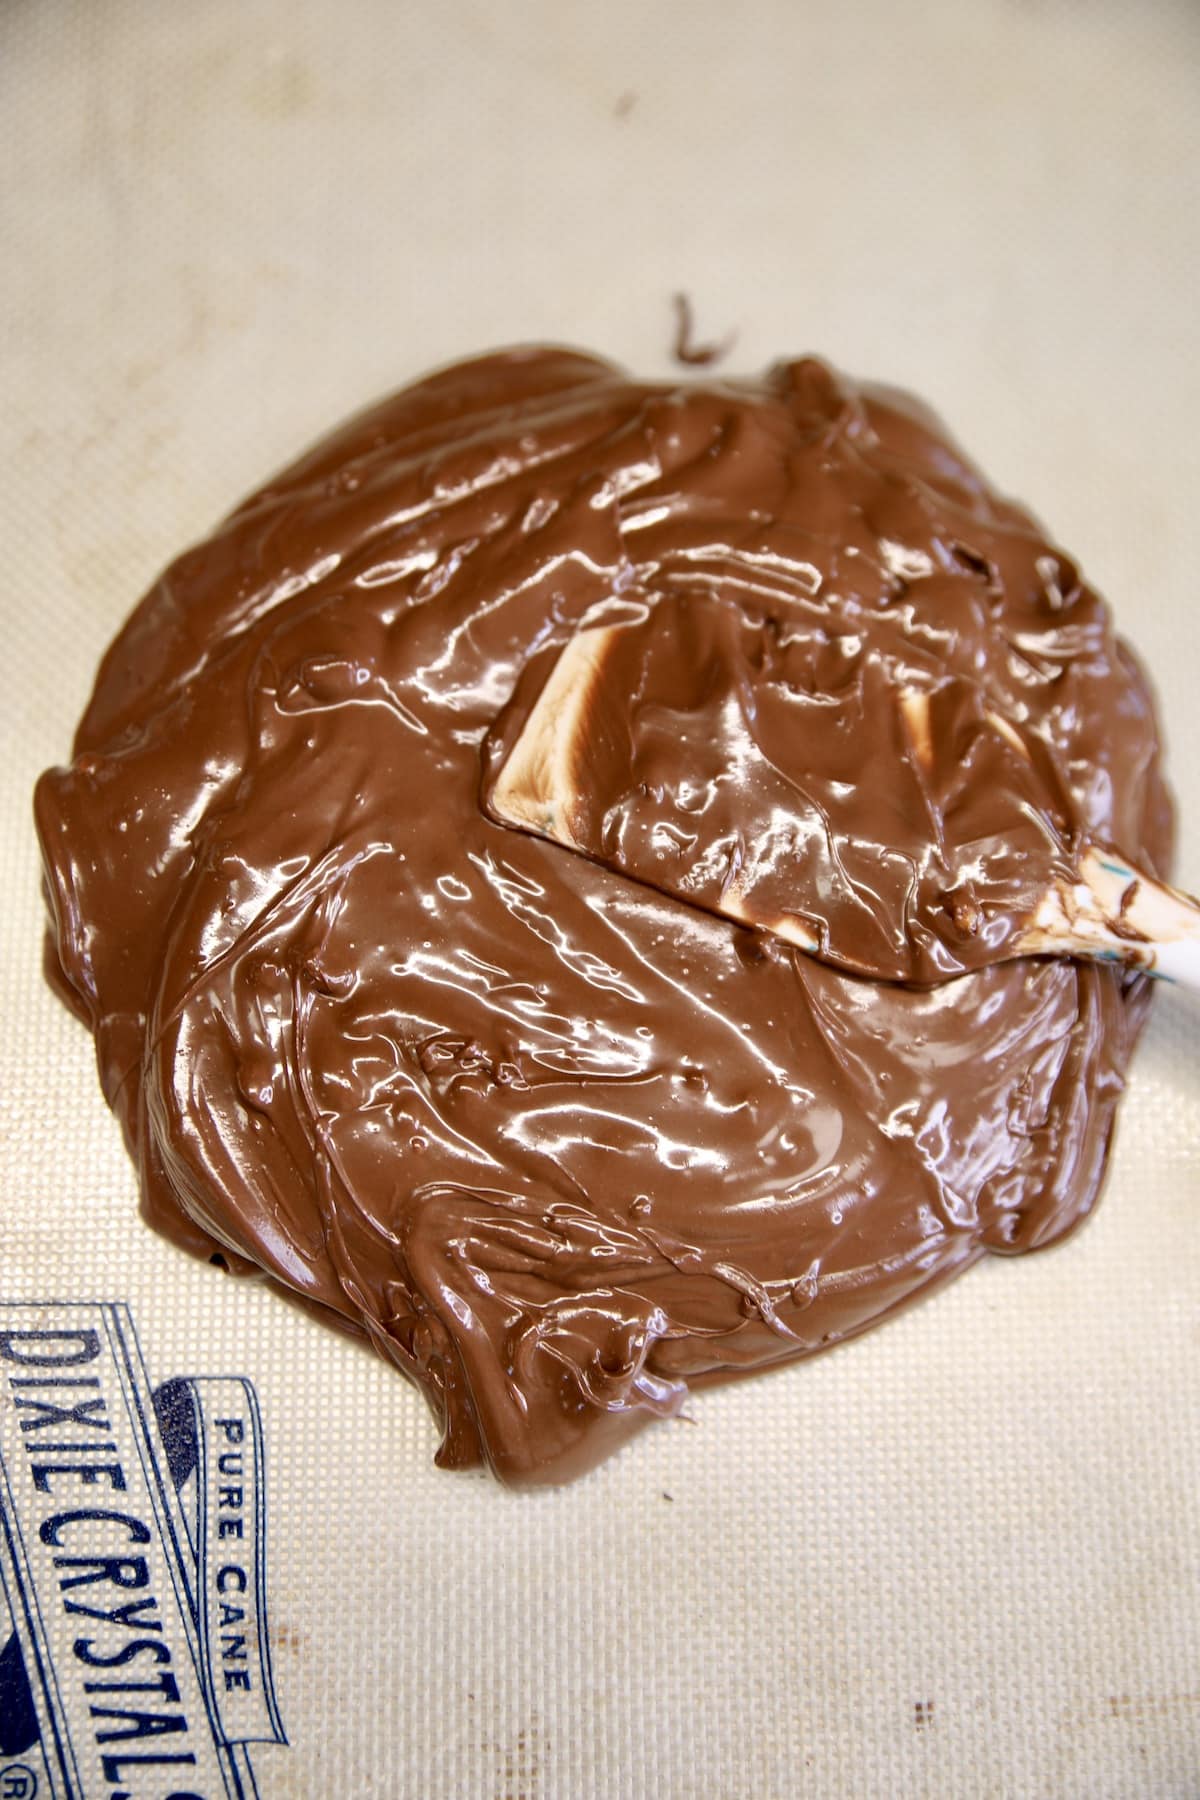 Melted chocolate on a silicone mat.